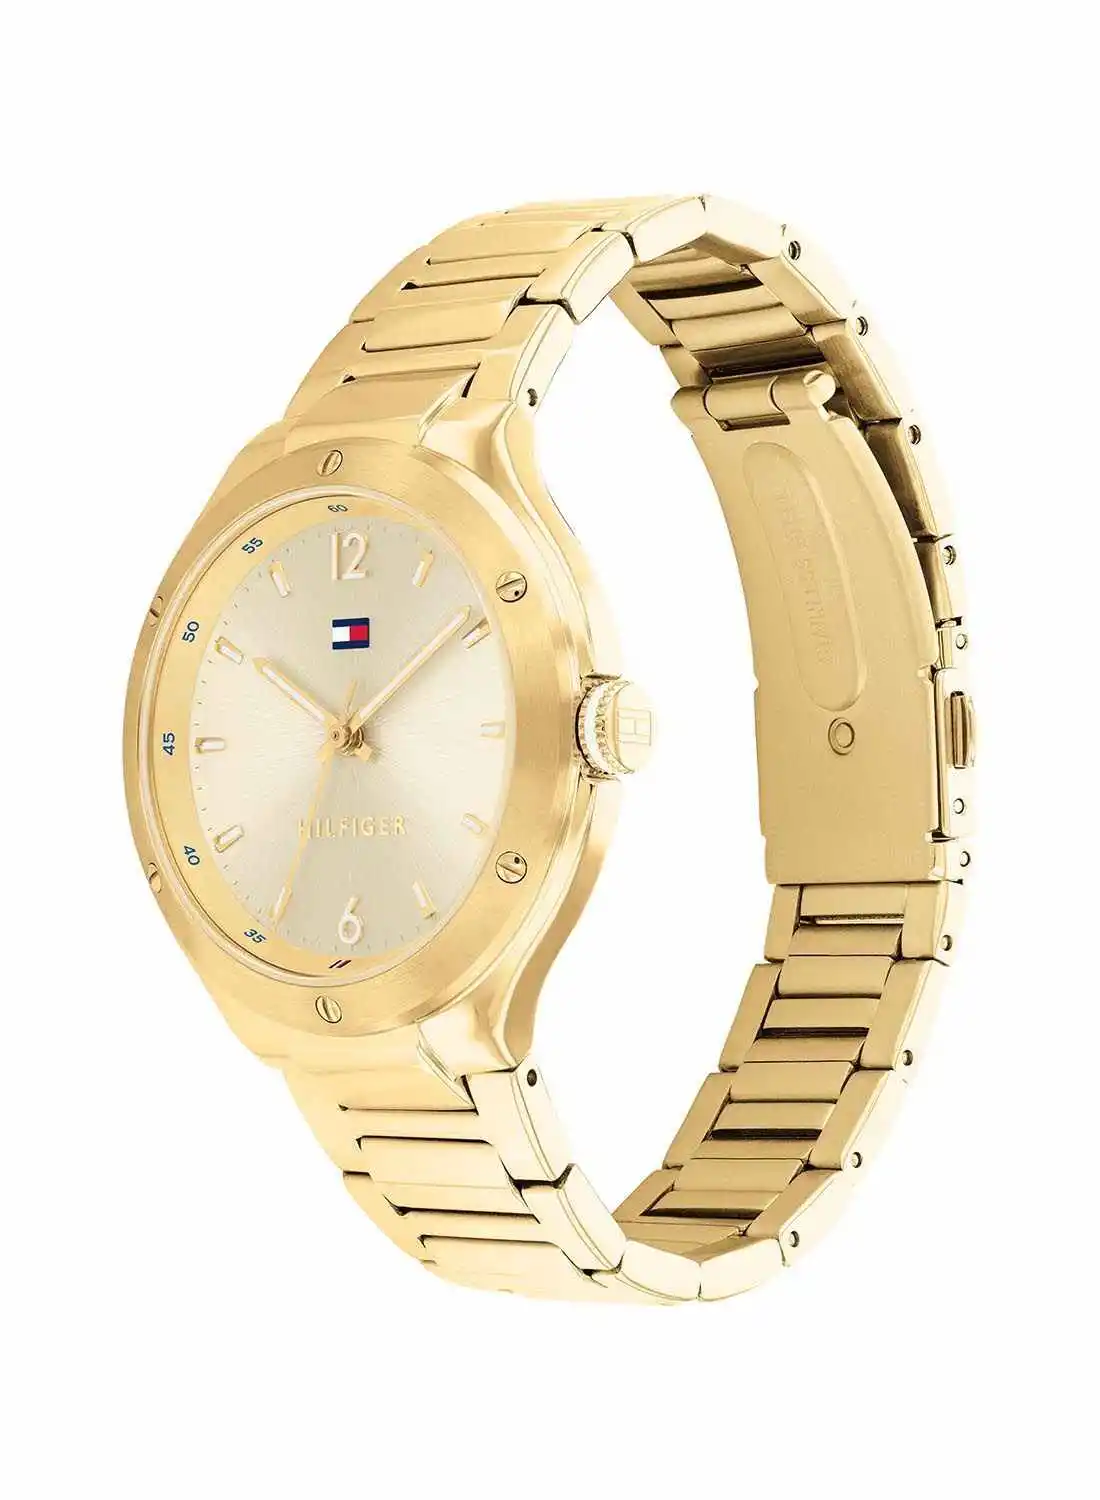 TOMMY HILFIGER TOMMY HILFIGER NAOMI WOMEN's LIGHT CHAMPAGNE DIAL, IONIC THIN GOLD PLATED 2 STEEL WATCH - 1782477